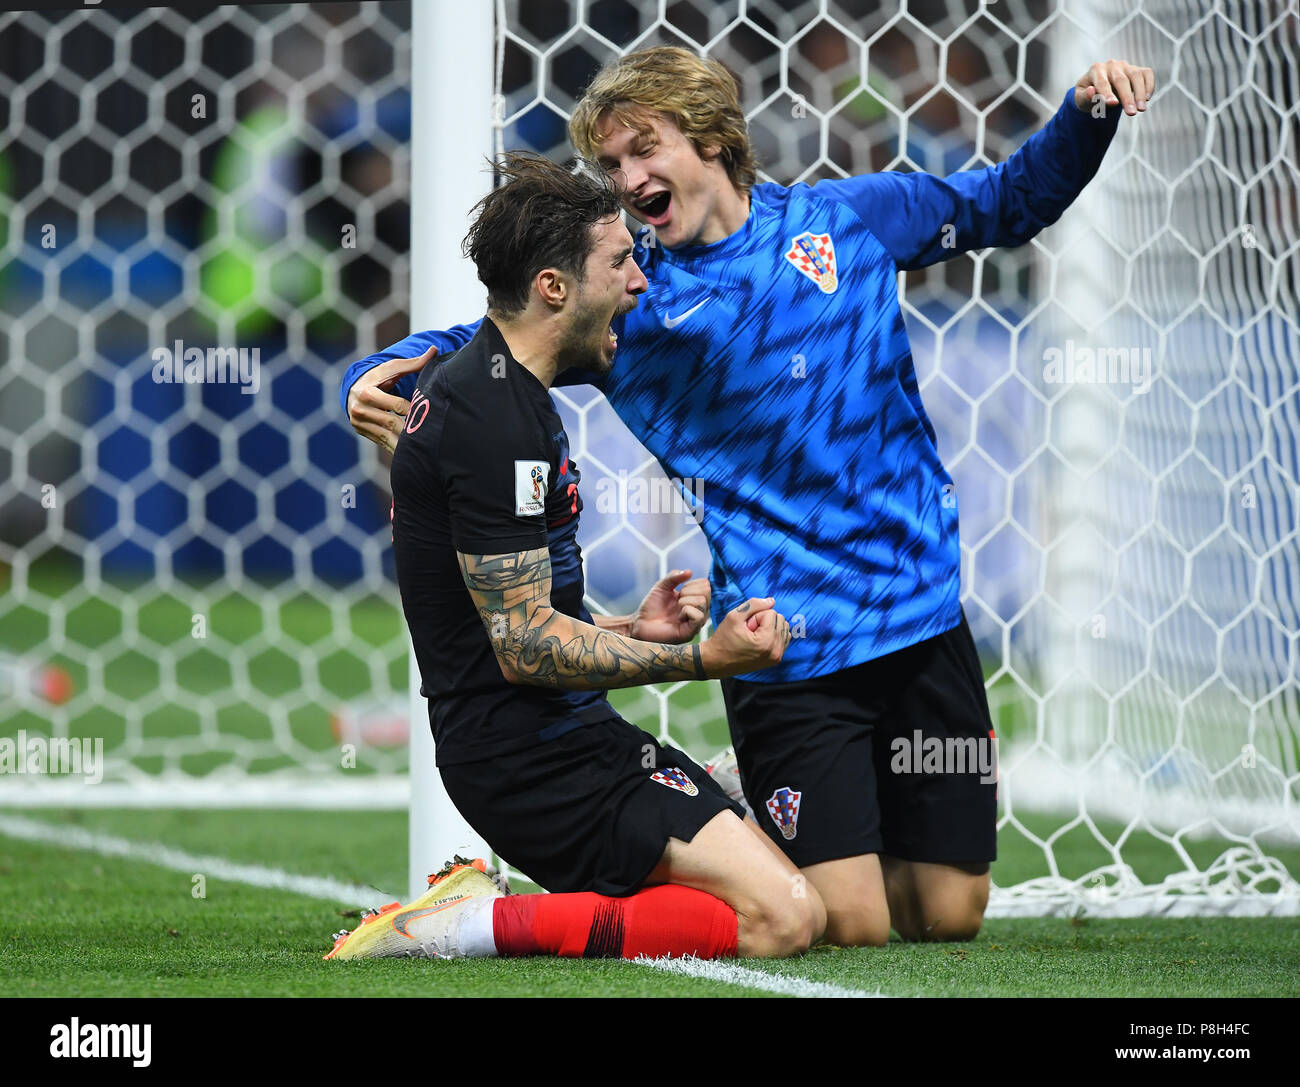 Moscow, Russia. 11th July, 2018. Moscow, Russia. 11th July, 2018. Croatia's Sime Vrsaljko and Tin Jedvaj cheer after the final whistle GES/Football/World Cup 2018 Russia: Semi-finals: Croatia - England, 11.07.2018 GES/Soccer/Football/Worldcup 2018 Russia: semi final: Croatia vs England, Moscow, July 11, 2018 | usage worldwide Credit: dpa/Alamy Live News Credit: dpa picture alliance/Alamy Live News Stock Photo